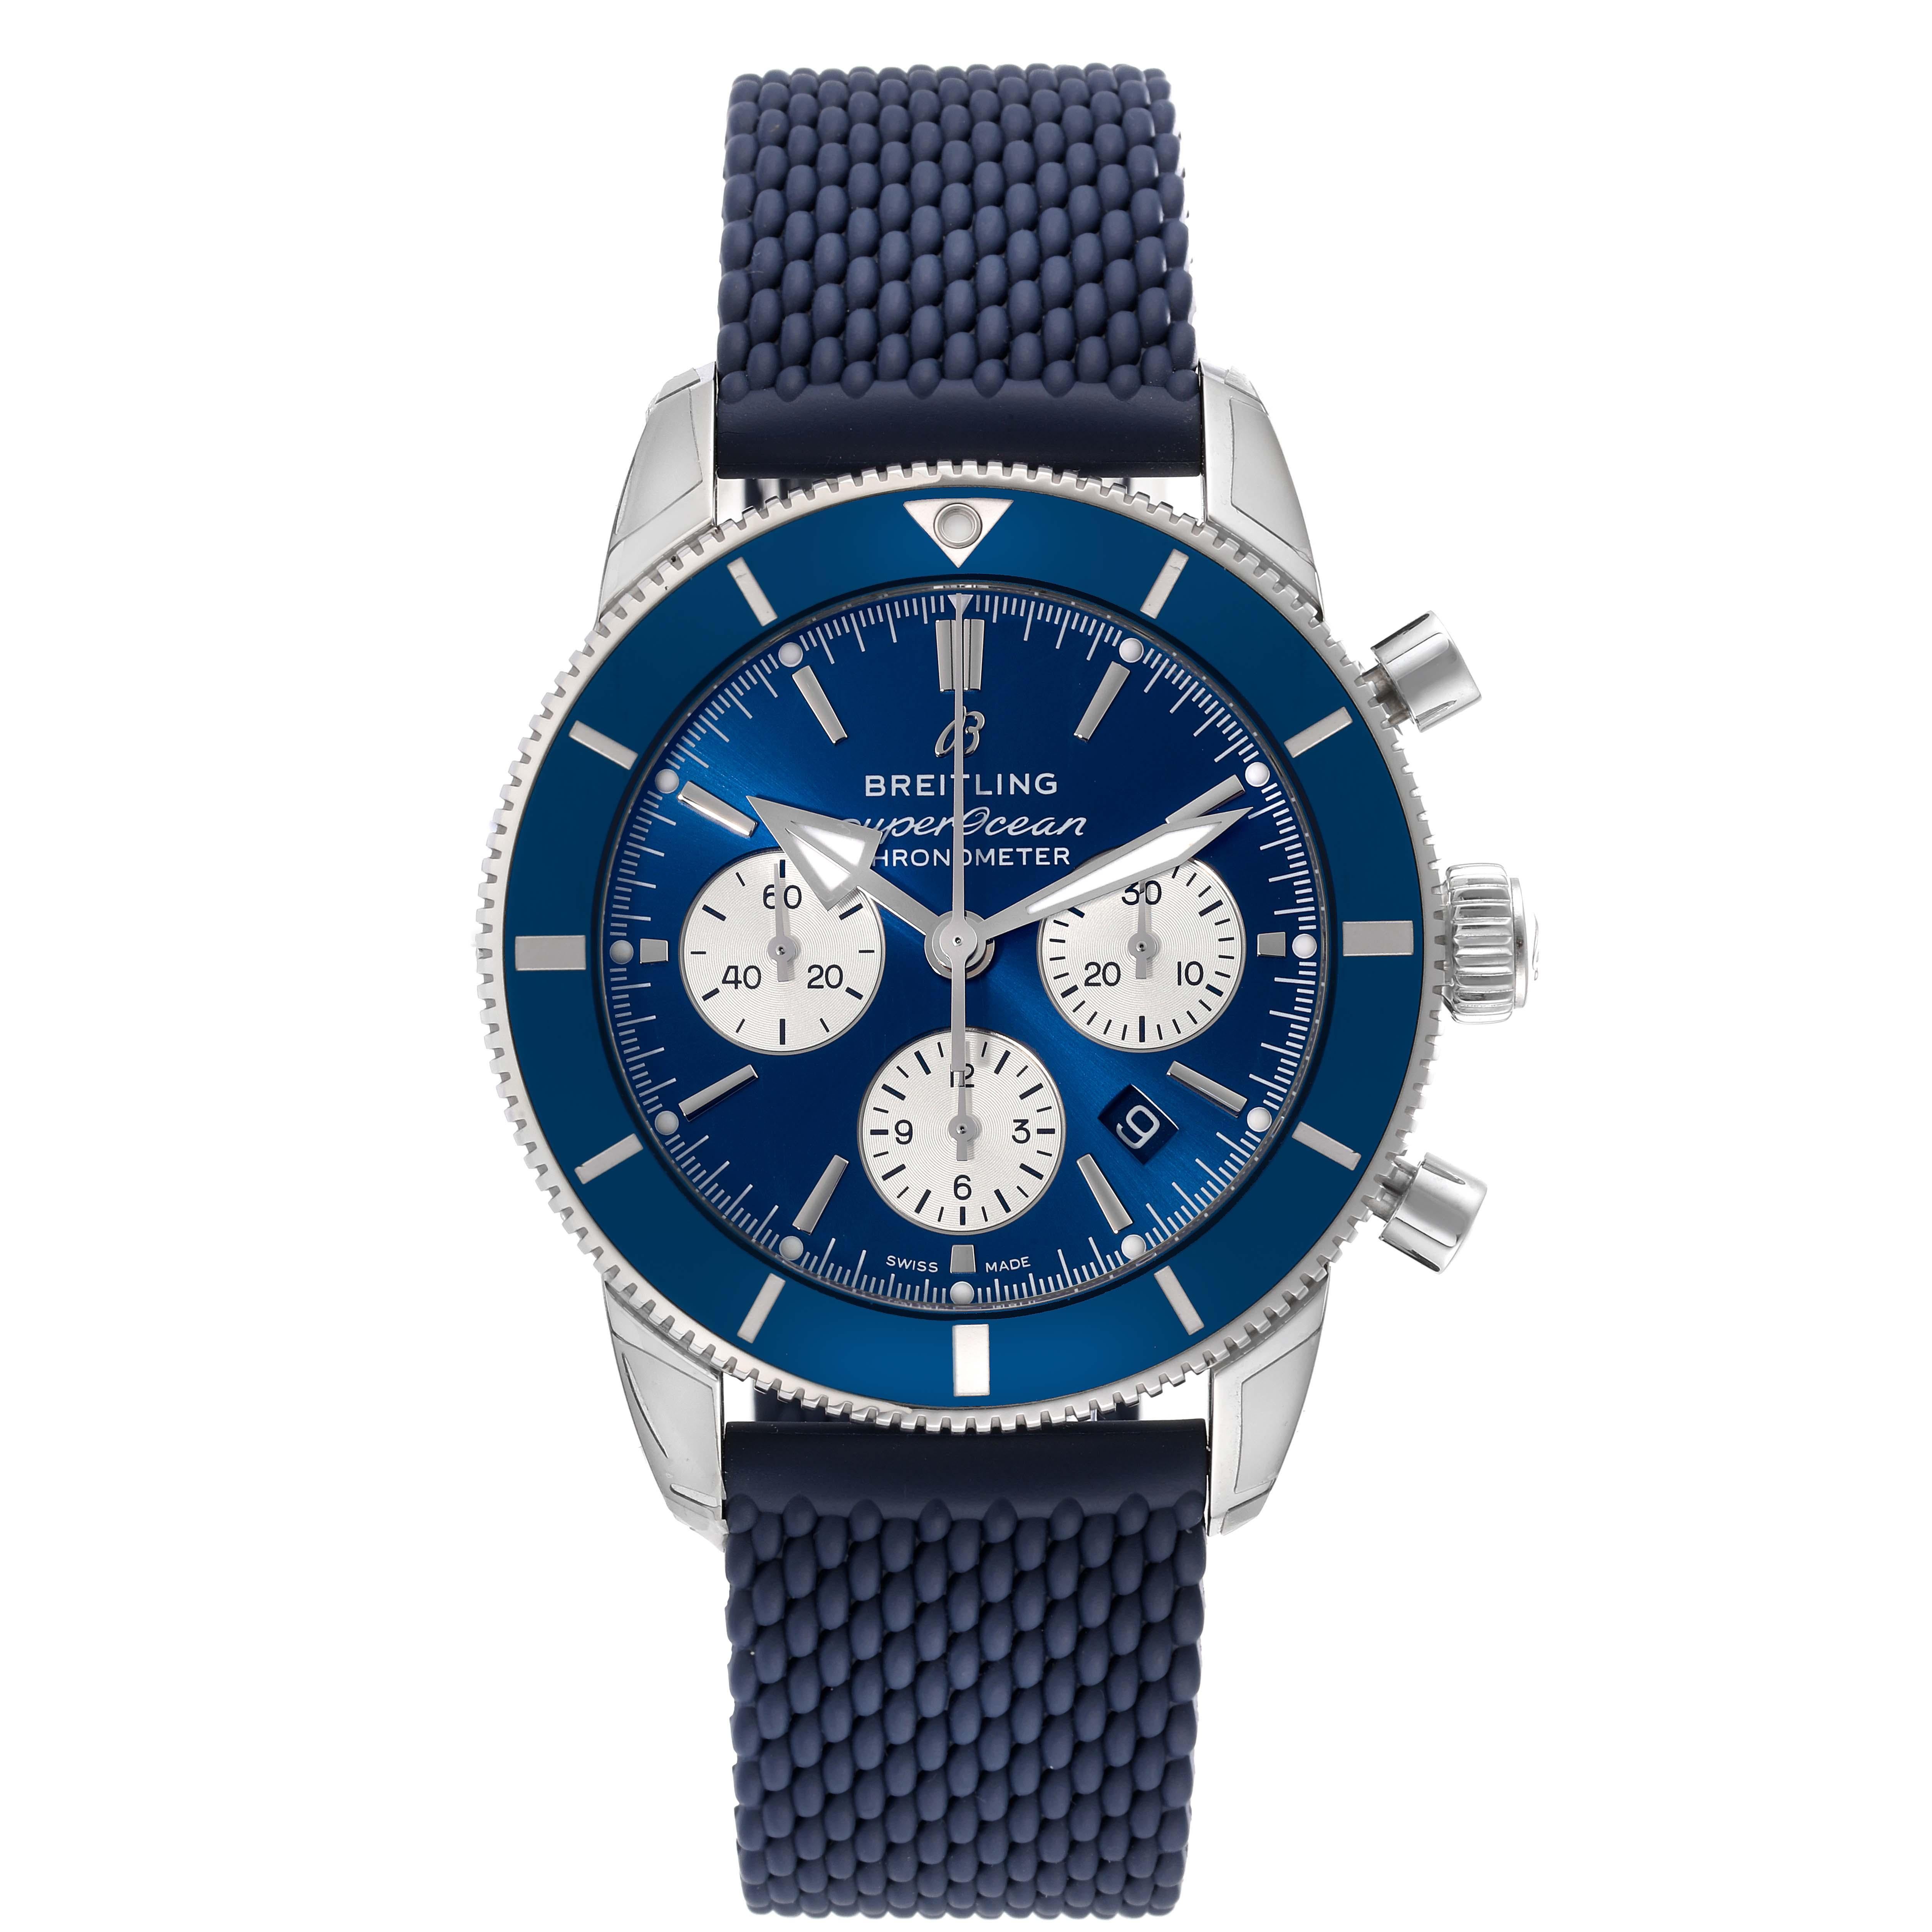 Breitling SuperOcean Heritage II B01 Blue Dial Steel Mens Watch AB0162 Unworn. Automatic self-winding movement. Stainless steel case 44 mm in diameter.  Exhibition transparent sapphire crystal caseback. Blue unidirectional rotating bezel. Scratch